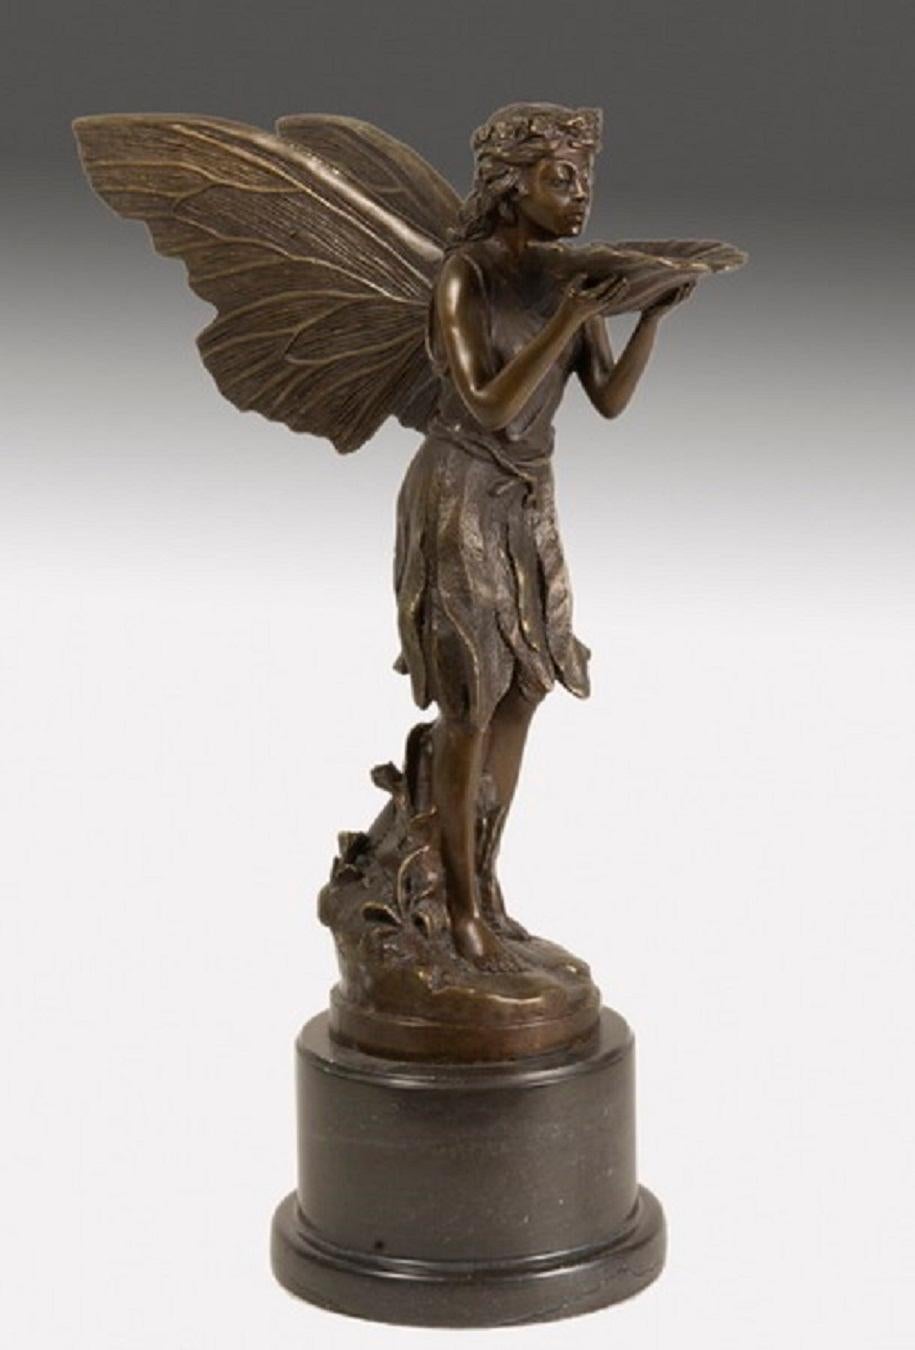 On a simple circular base pedestal is the bronze figure of a young girl dressed in a suit of leaves, with wings similar to those of a butterfly on her back and a bowl near her face, as if to drink. It is possible to appreciate a series of influences